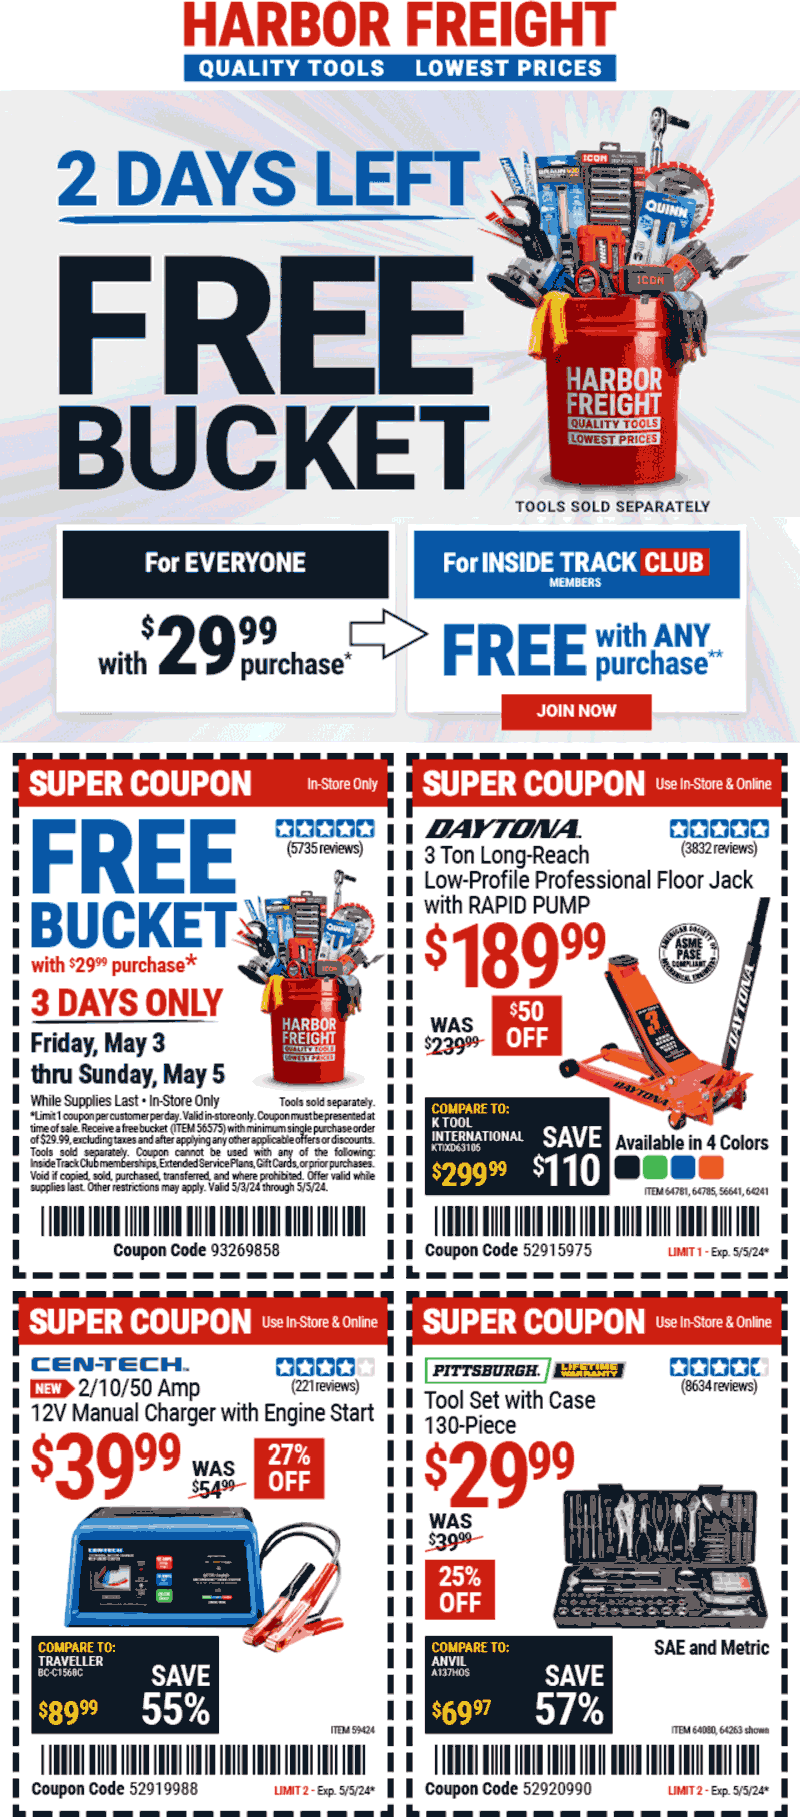 Harbor Freight stores Coupon  Free bucket at Harbor Freight Tools #harborfreight 